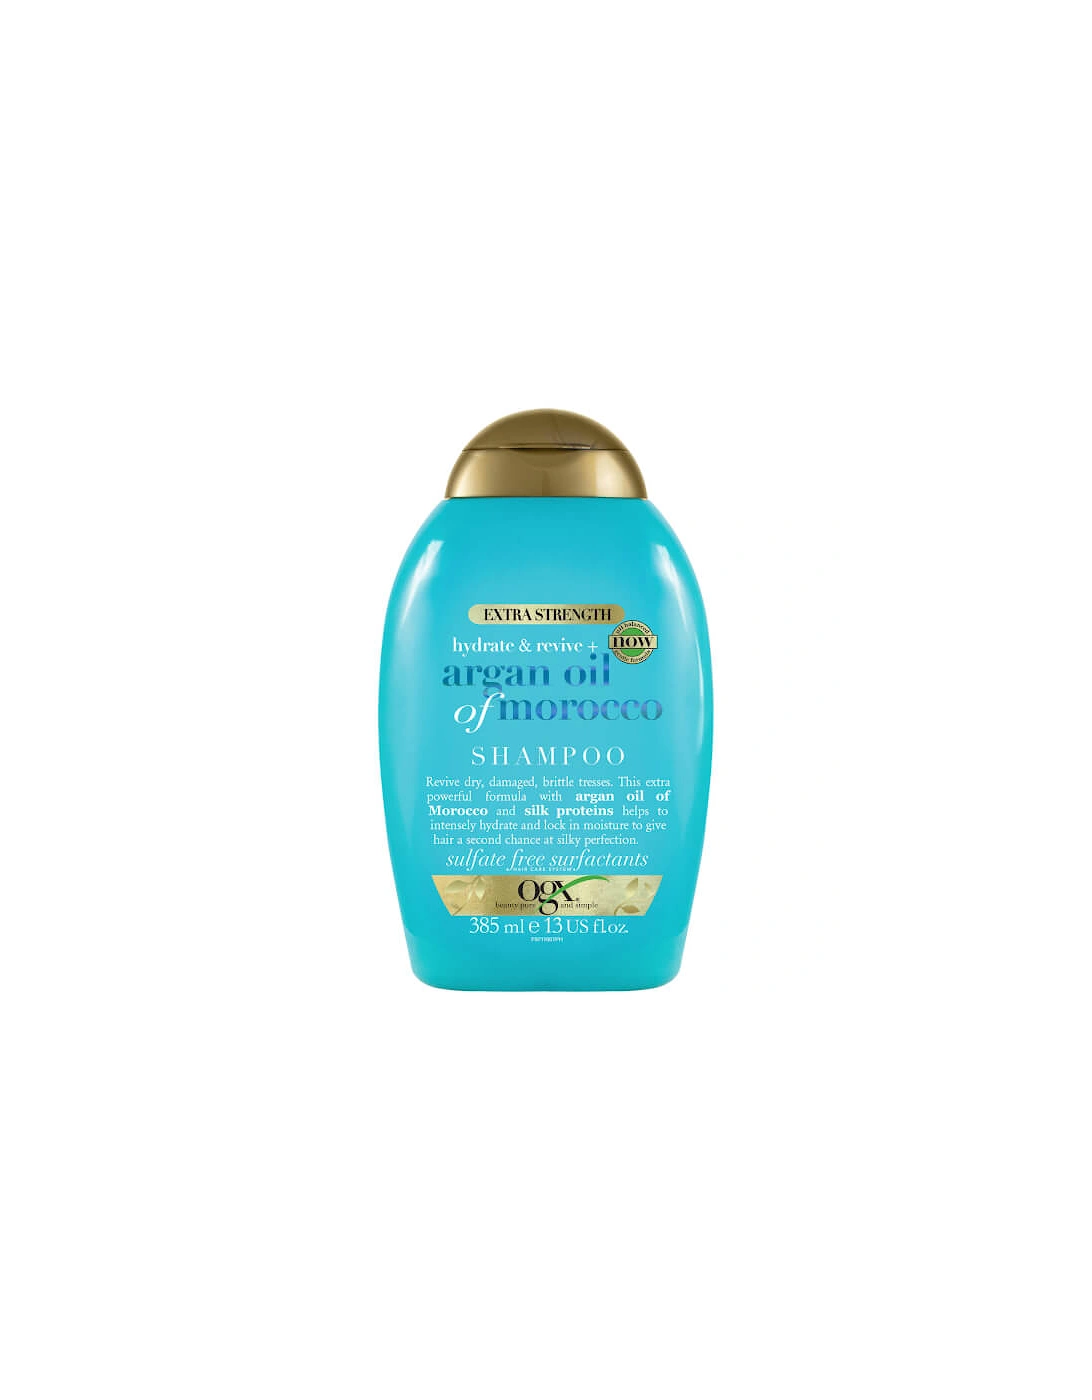 Hydrate & Revive+ Argan Oil of Morocco Extra Strength Shampoo 385ml, 2 of 1